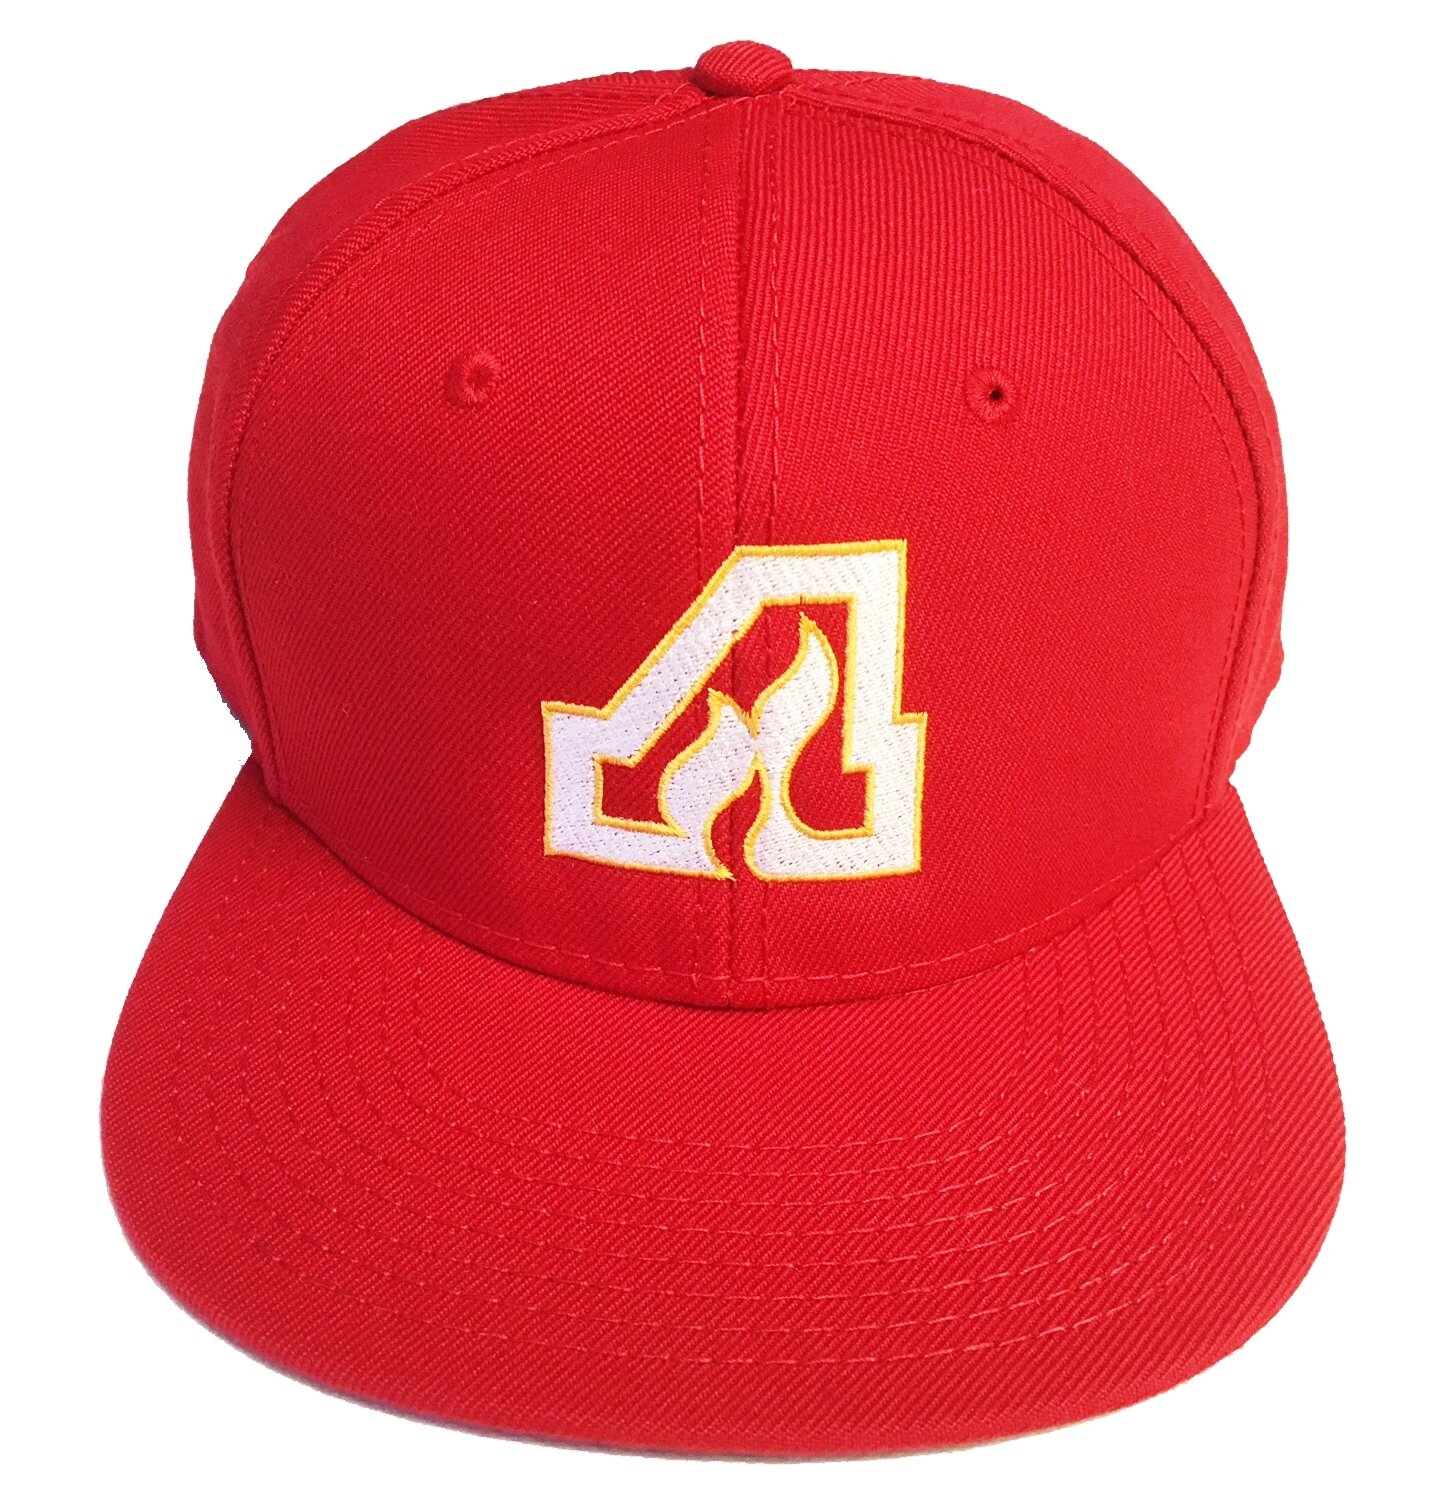 flames_snapback_front_1024x1024@2x.png.jpg